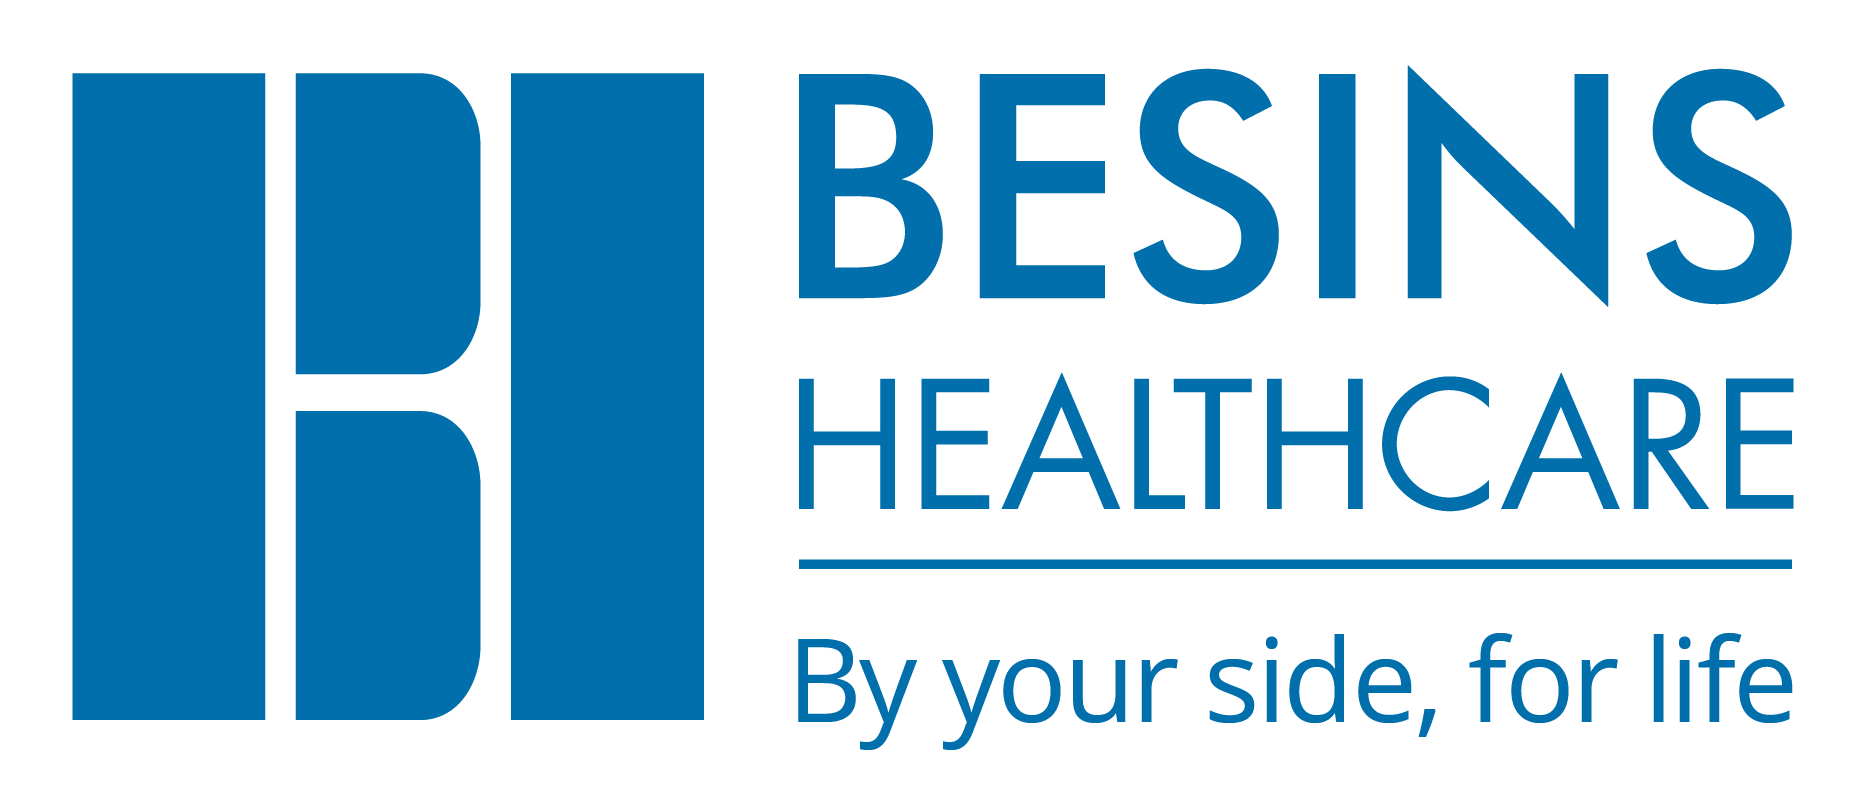 Besins Healthcare: Improving Project Planning, Communication, and Costs with a PPM Tool